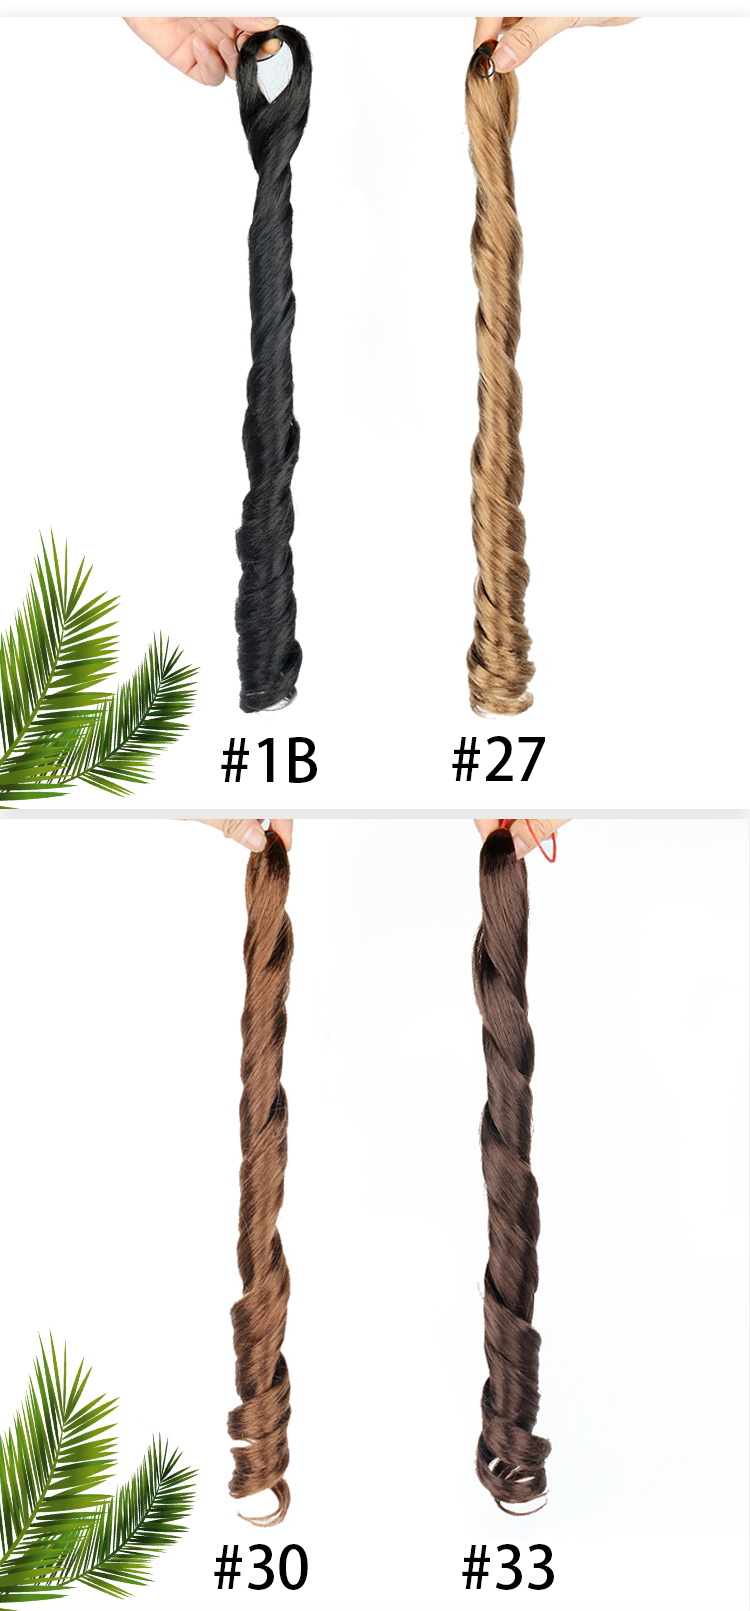 Julianna kanekalon french curl 24" synthetic ombre loose curl jumbo spiral braid extension hair attachment french curls braiding